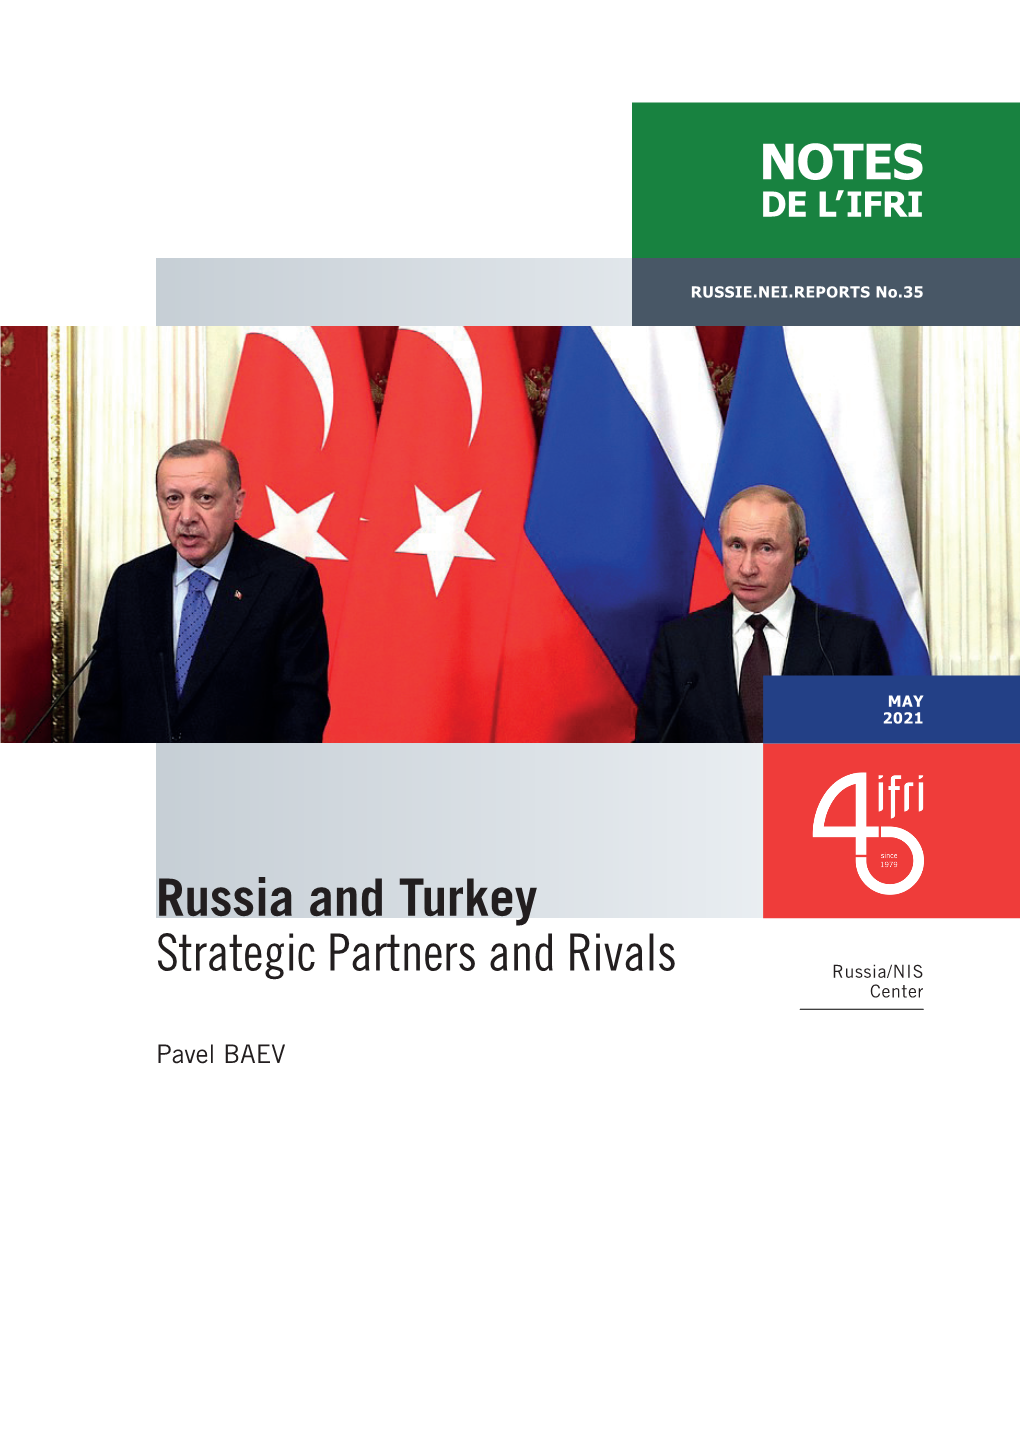 Russia and Turkey: Strategic Partners and Rivals